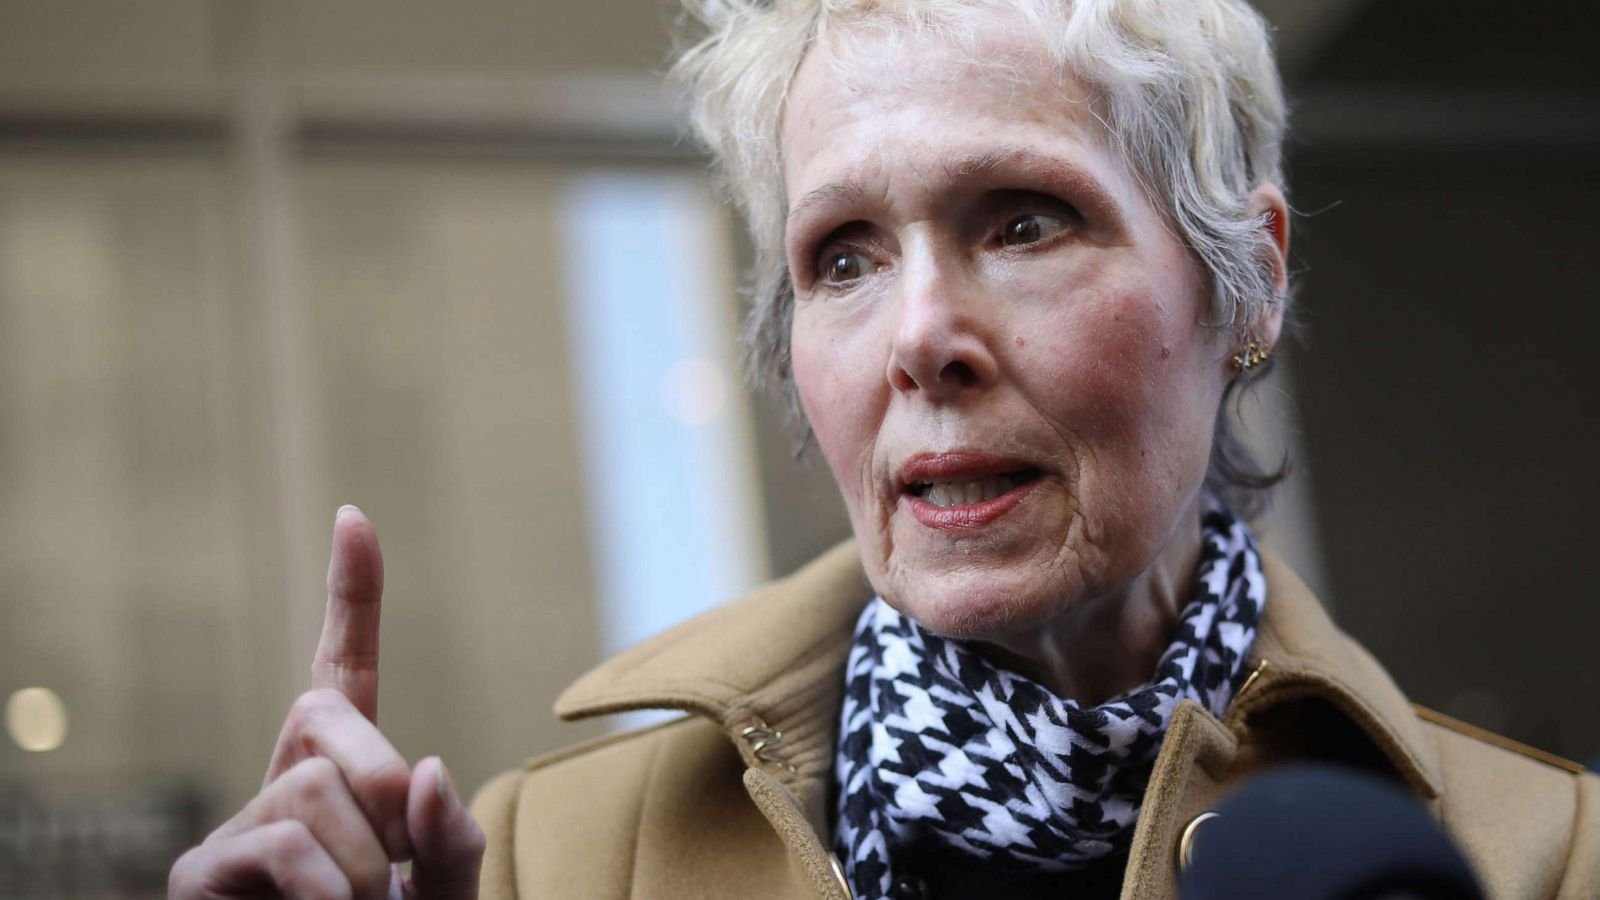 E. Jean Carroll Files New Lawsuit Against Trump on Thanksgiving